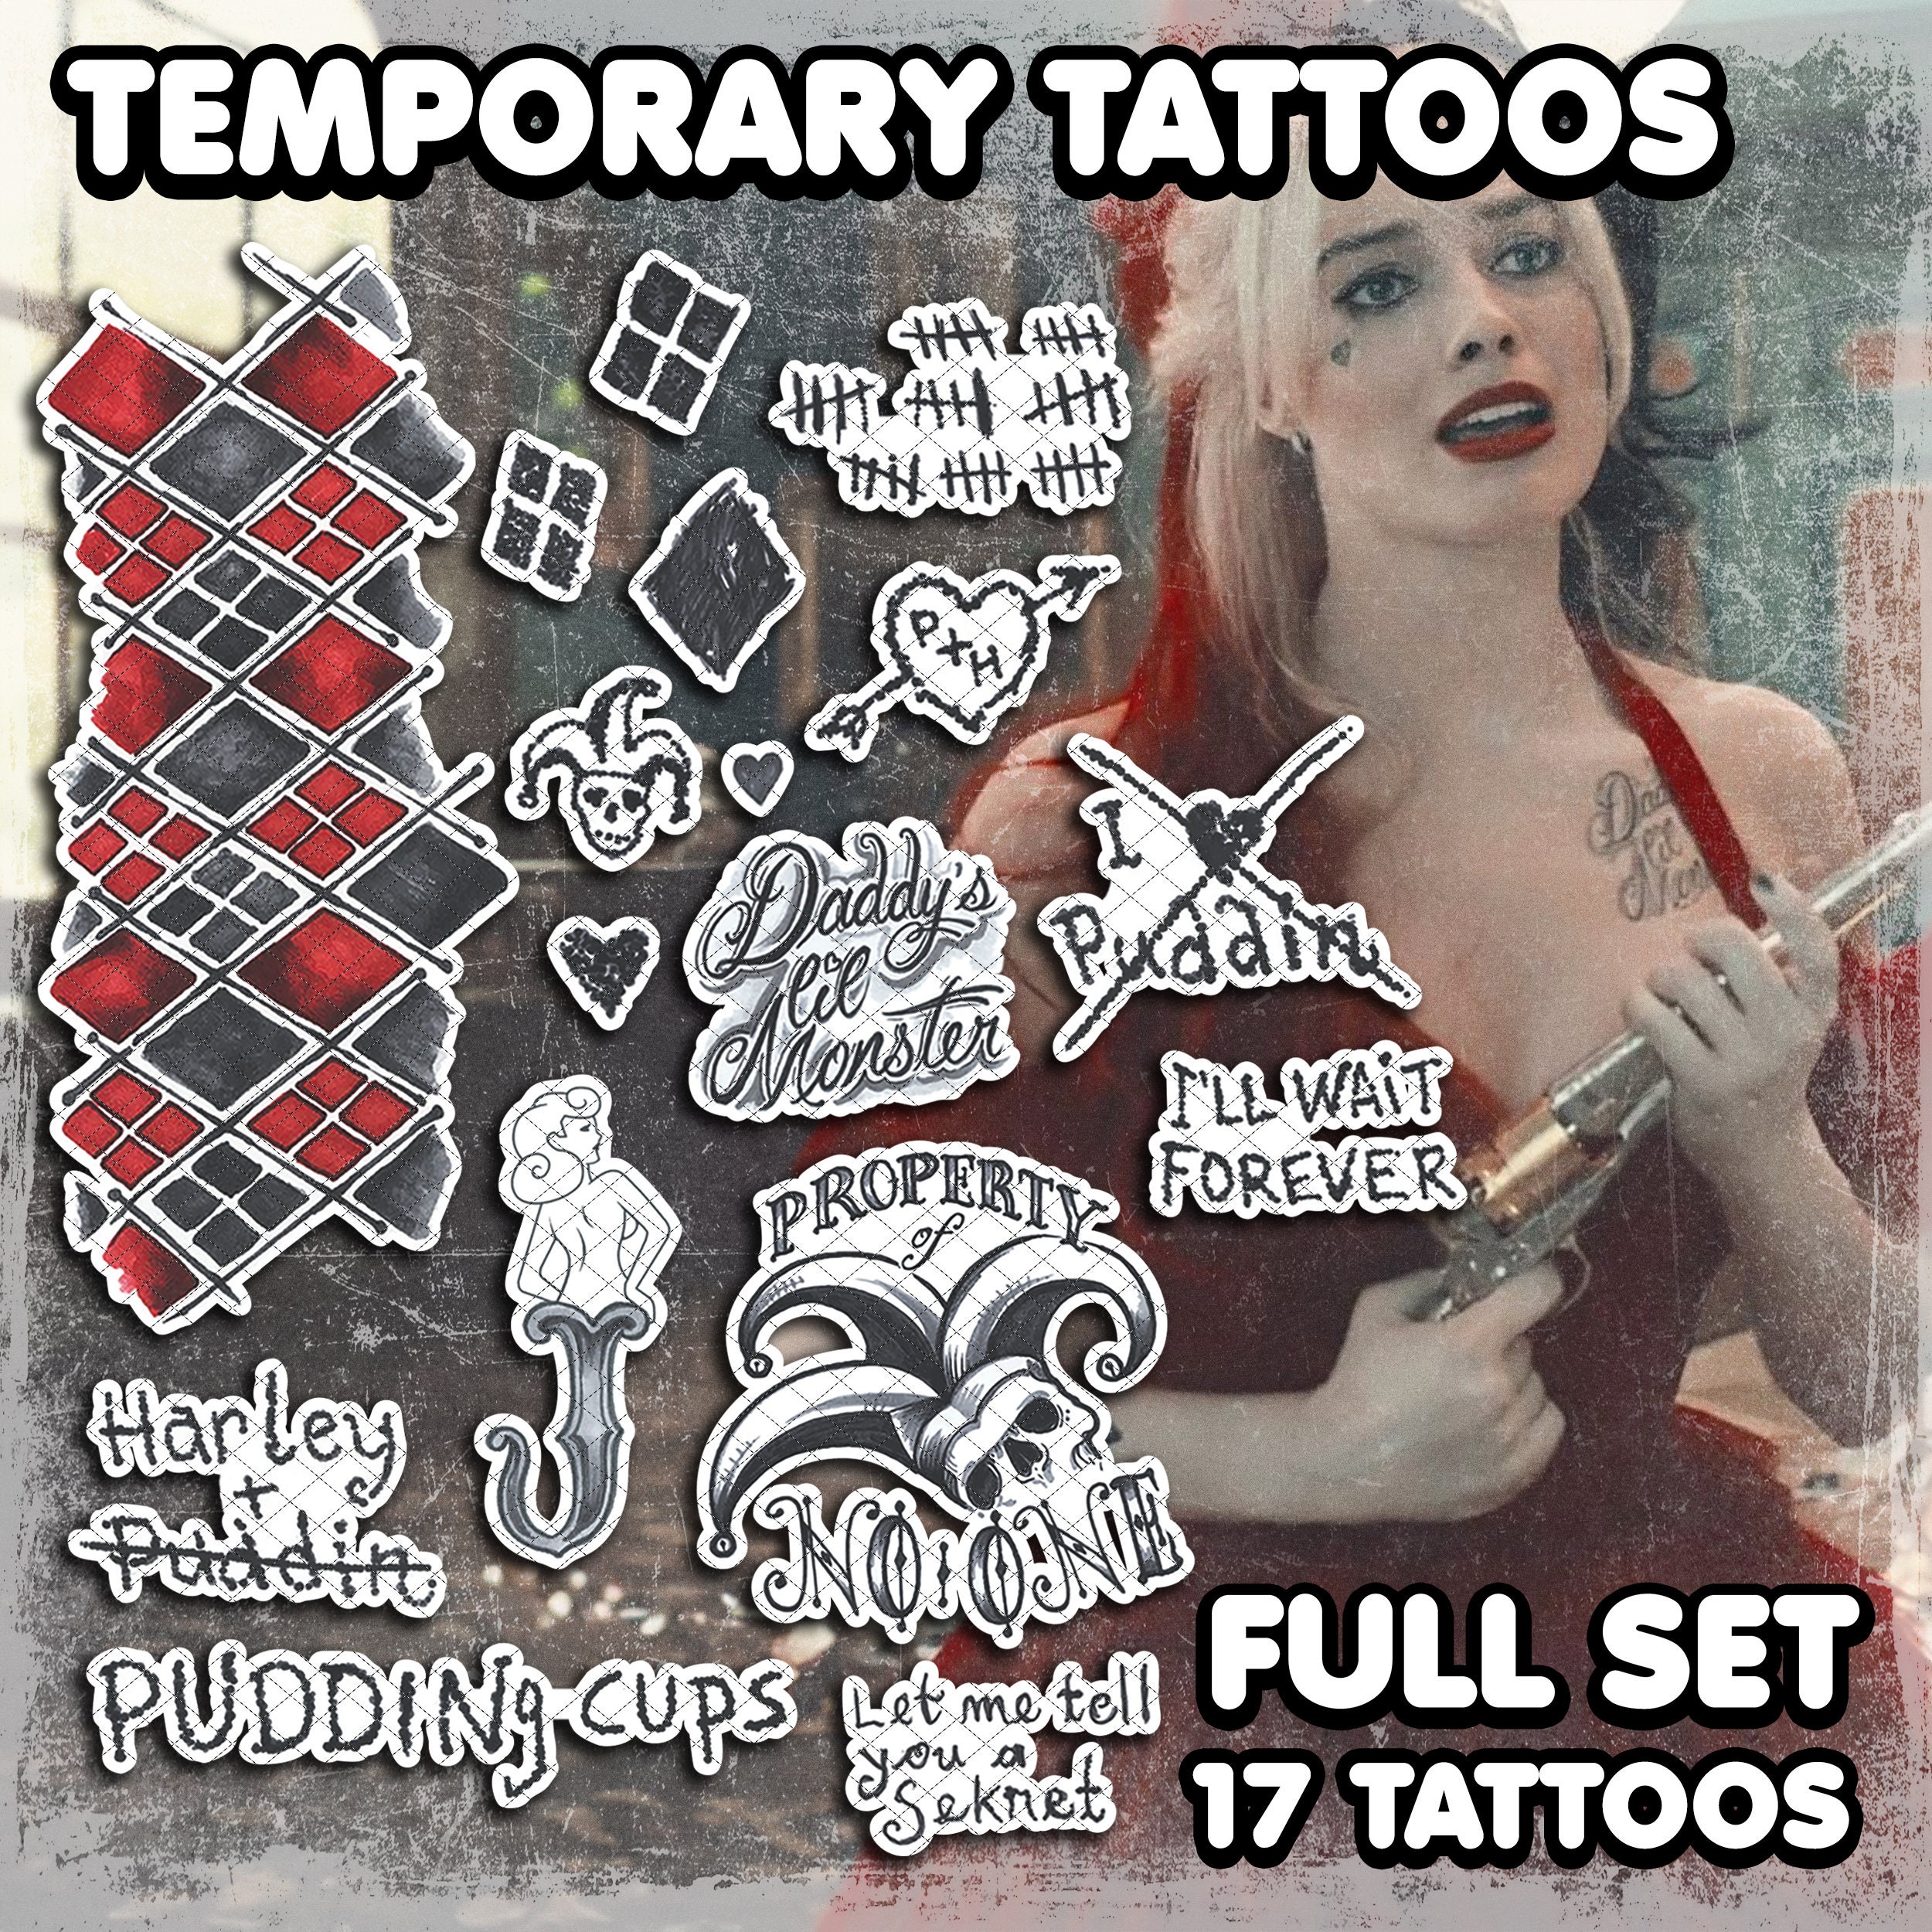  Ellie Cosplay Tattoos Last of US 2 Tattoos Sticker Waterproof  Arm Flower Arm Tattoos Sticker Game Props Boys and Girls Fashion : Beauty &  Personal Care